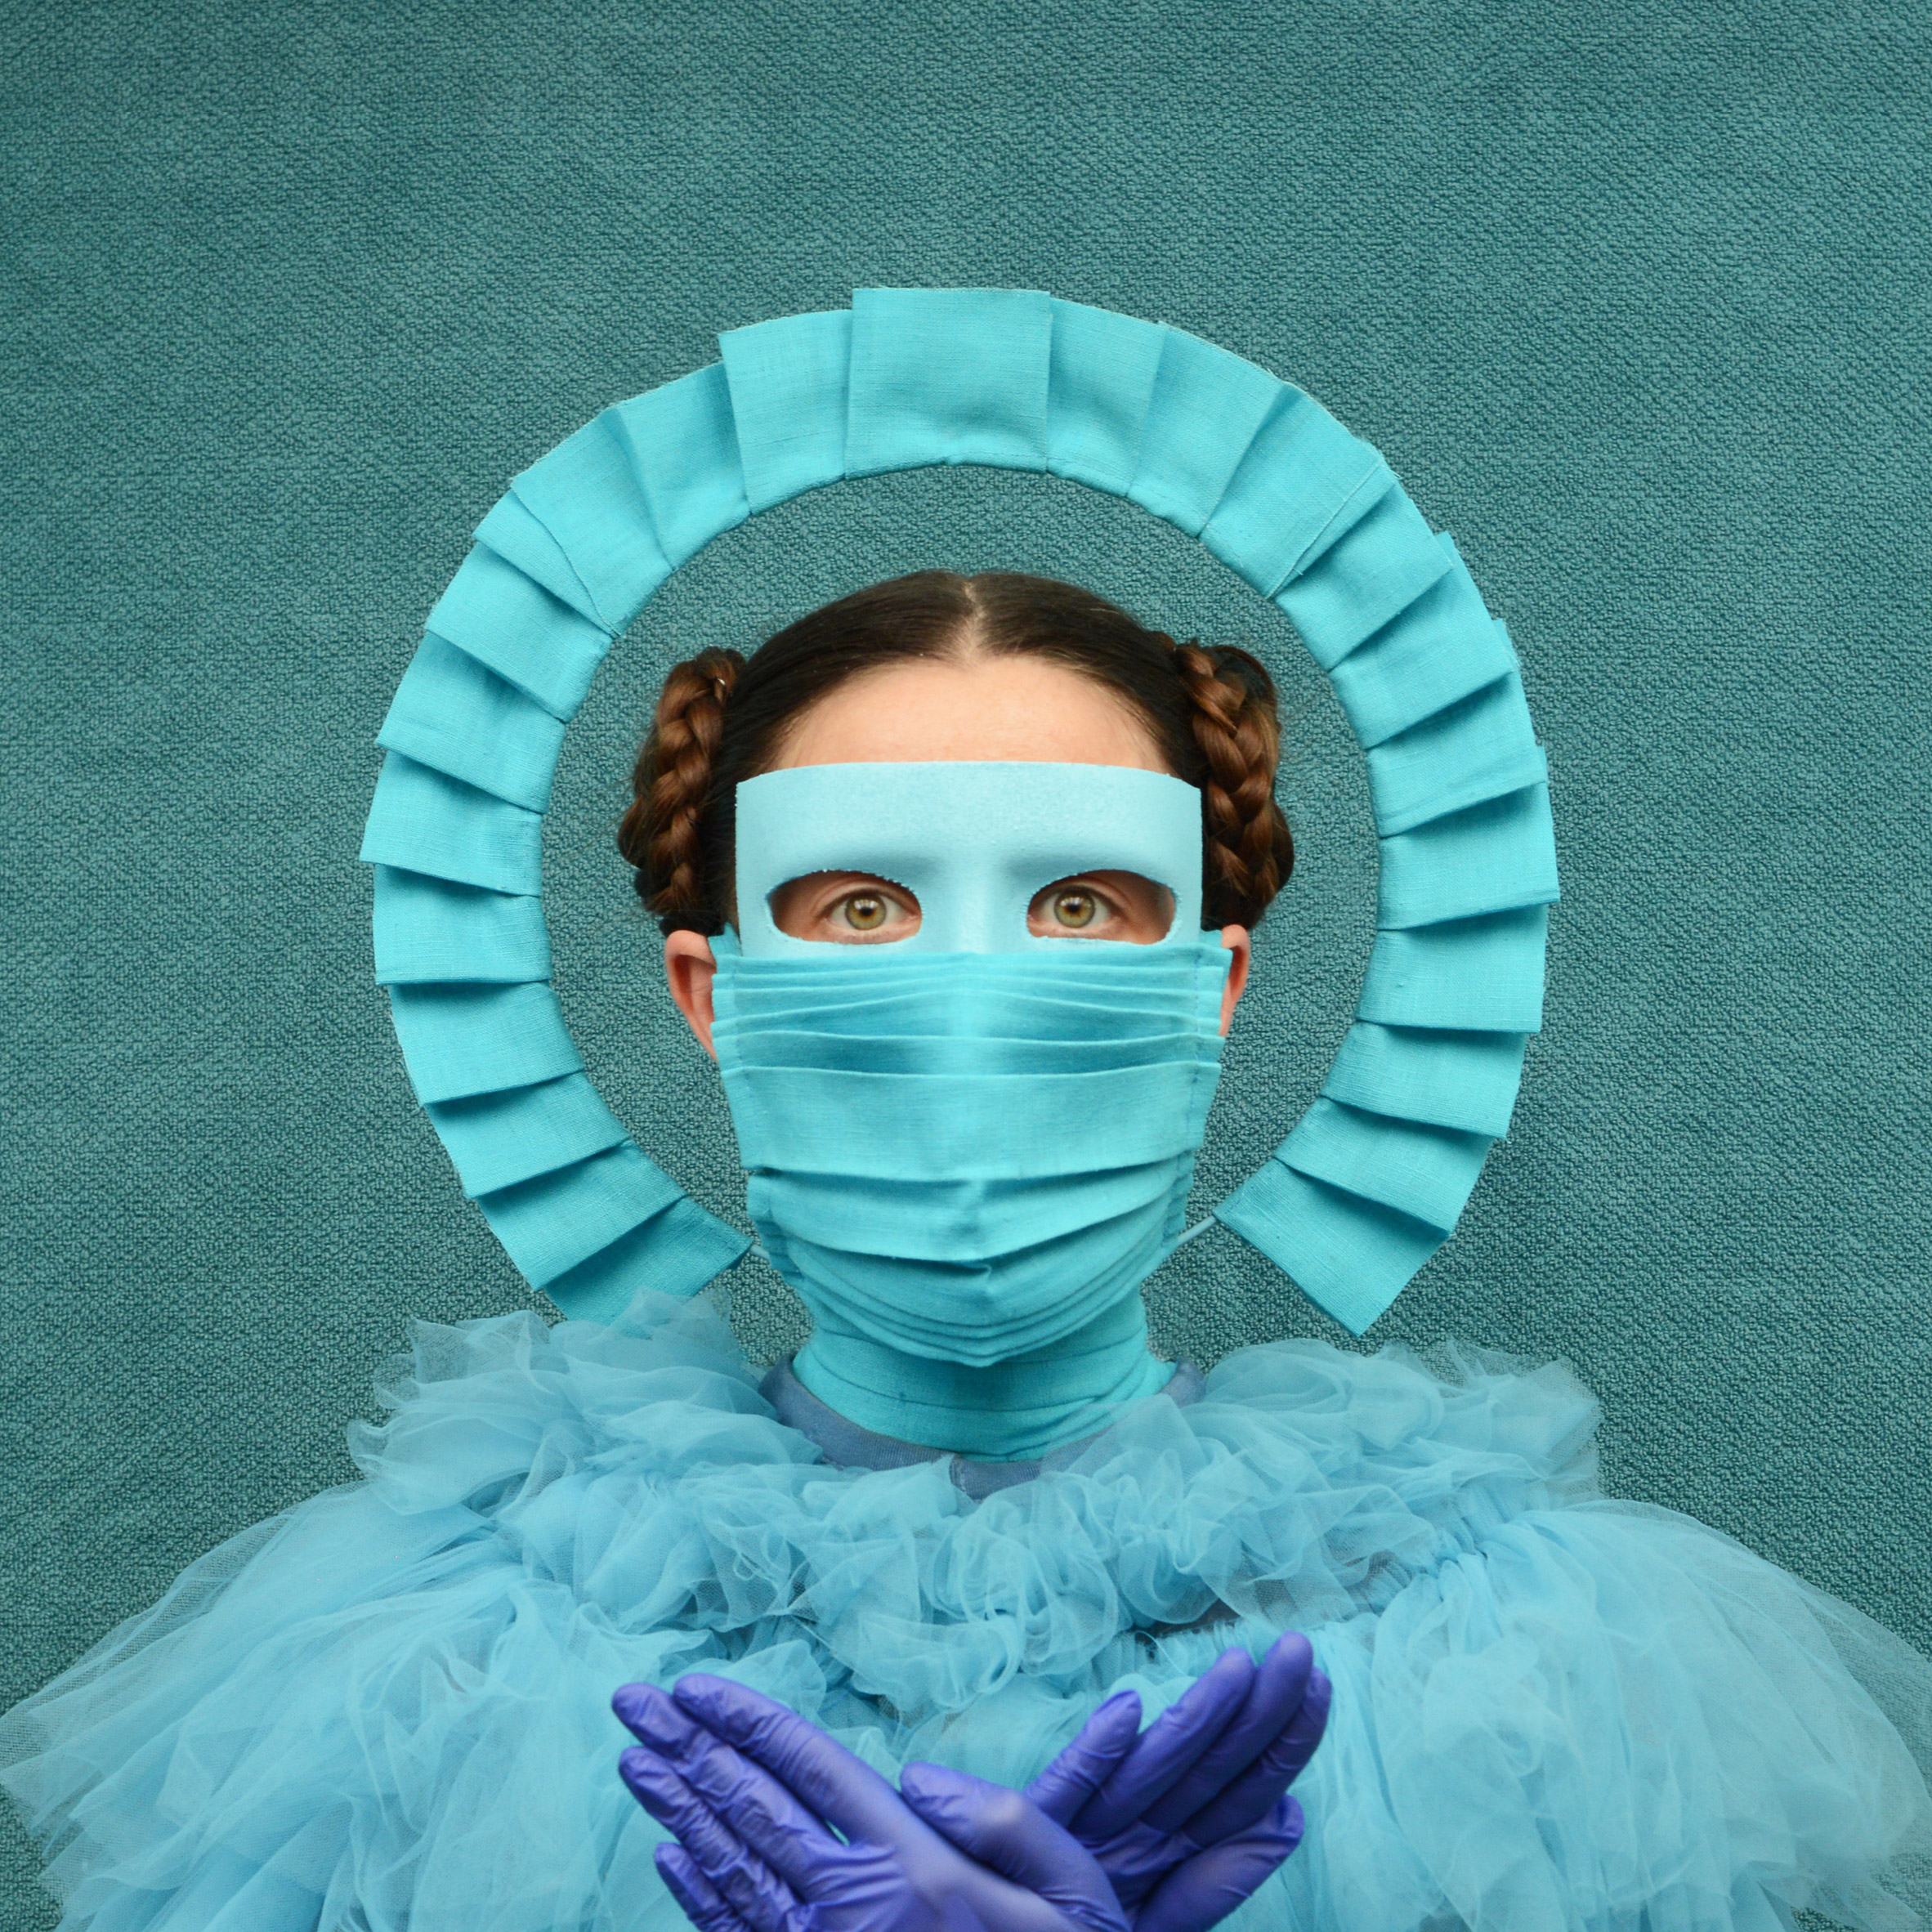 Freyja Sewell's Key Workers masks take cues from sci-fi and Buddhism